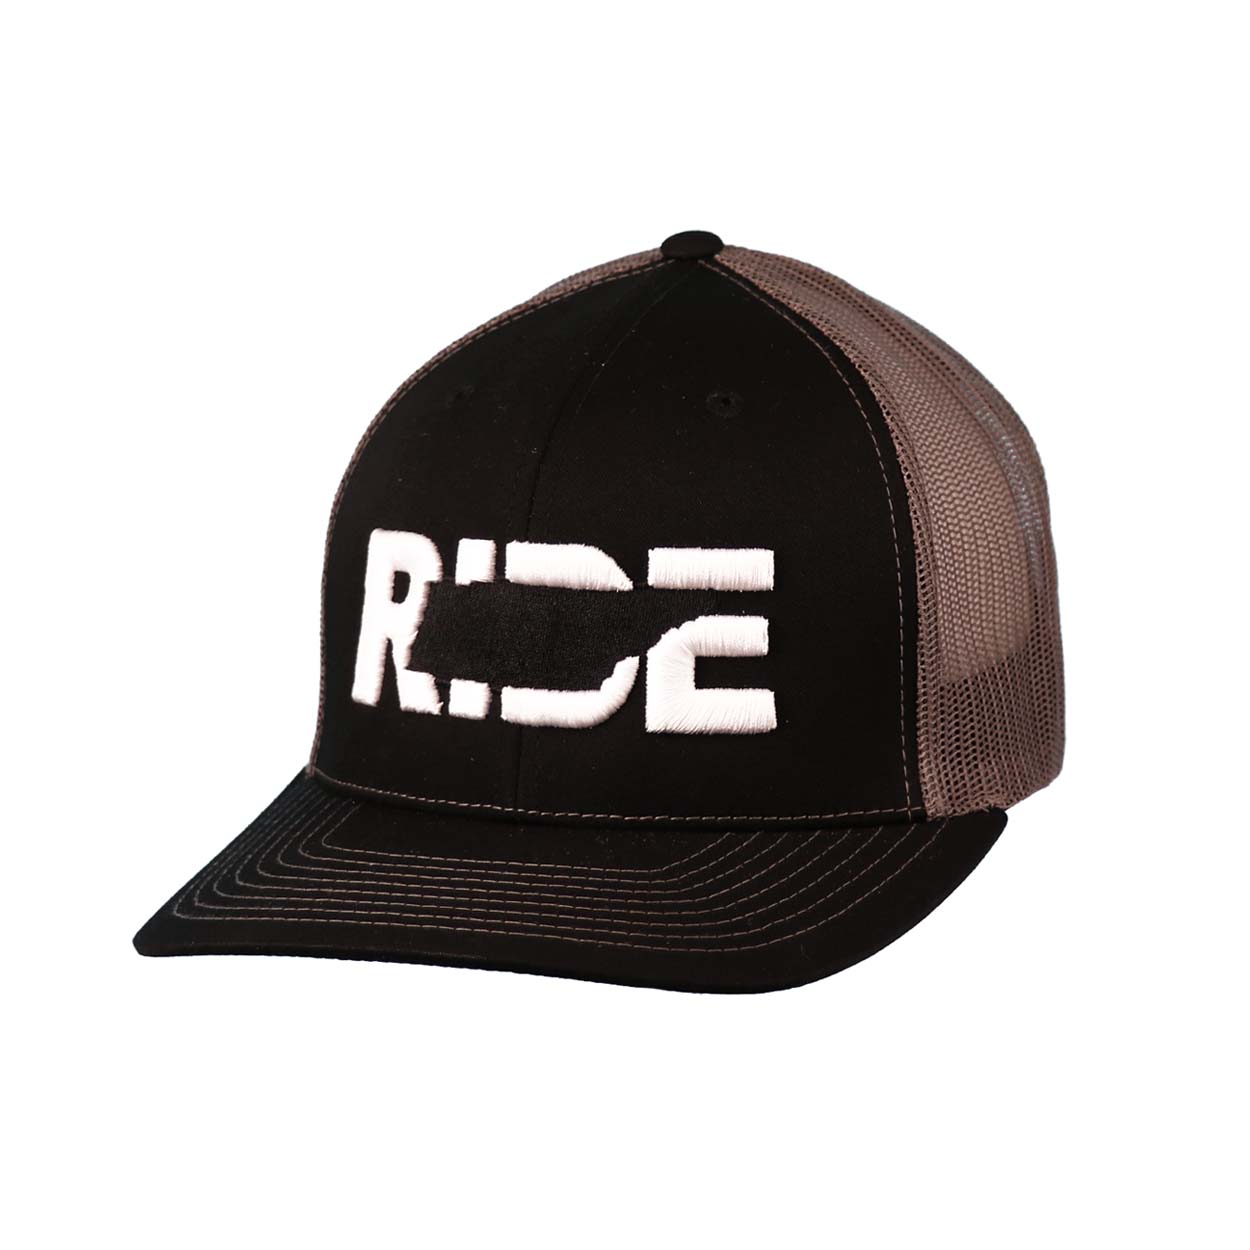 Ride Tennessee Classic Pro 3D Puff Embroidered Snapback Trucker Hat Black/Gray